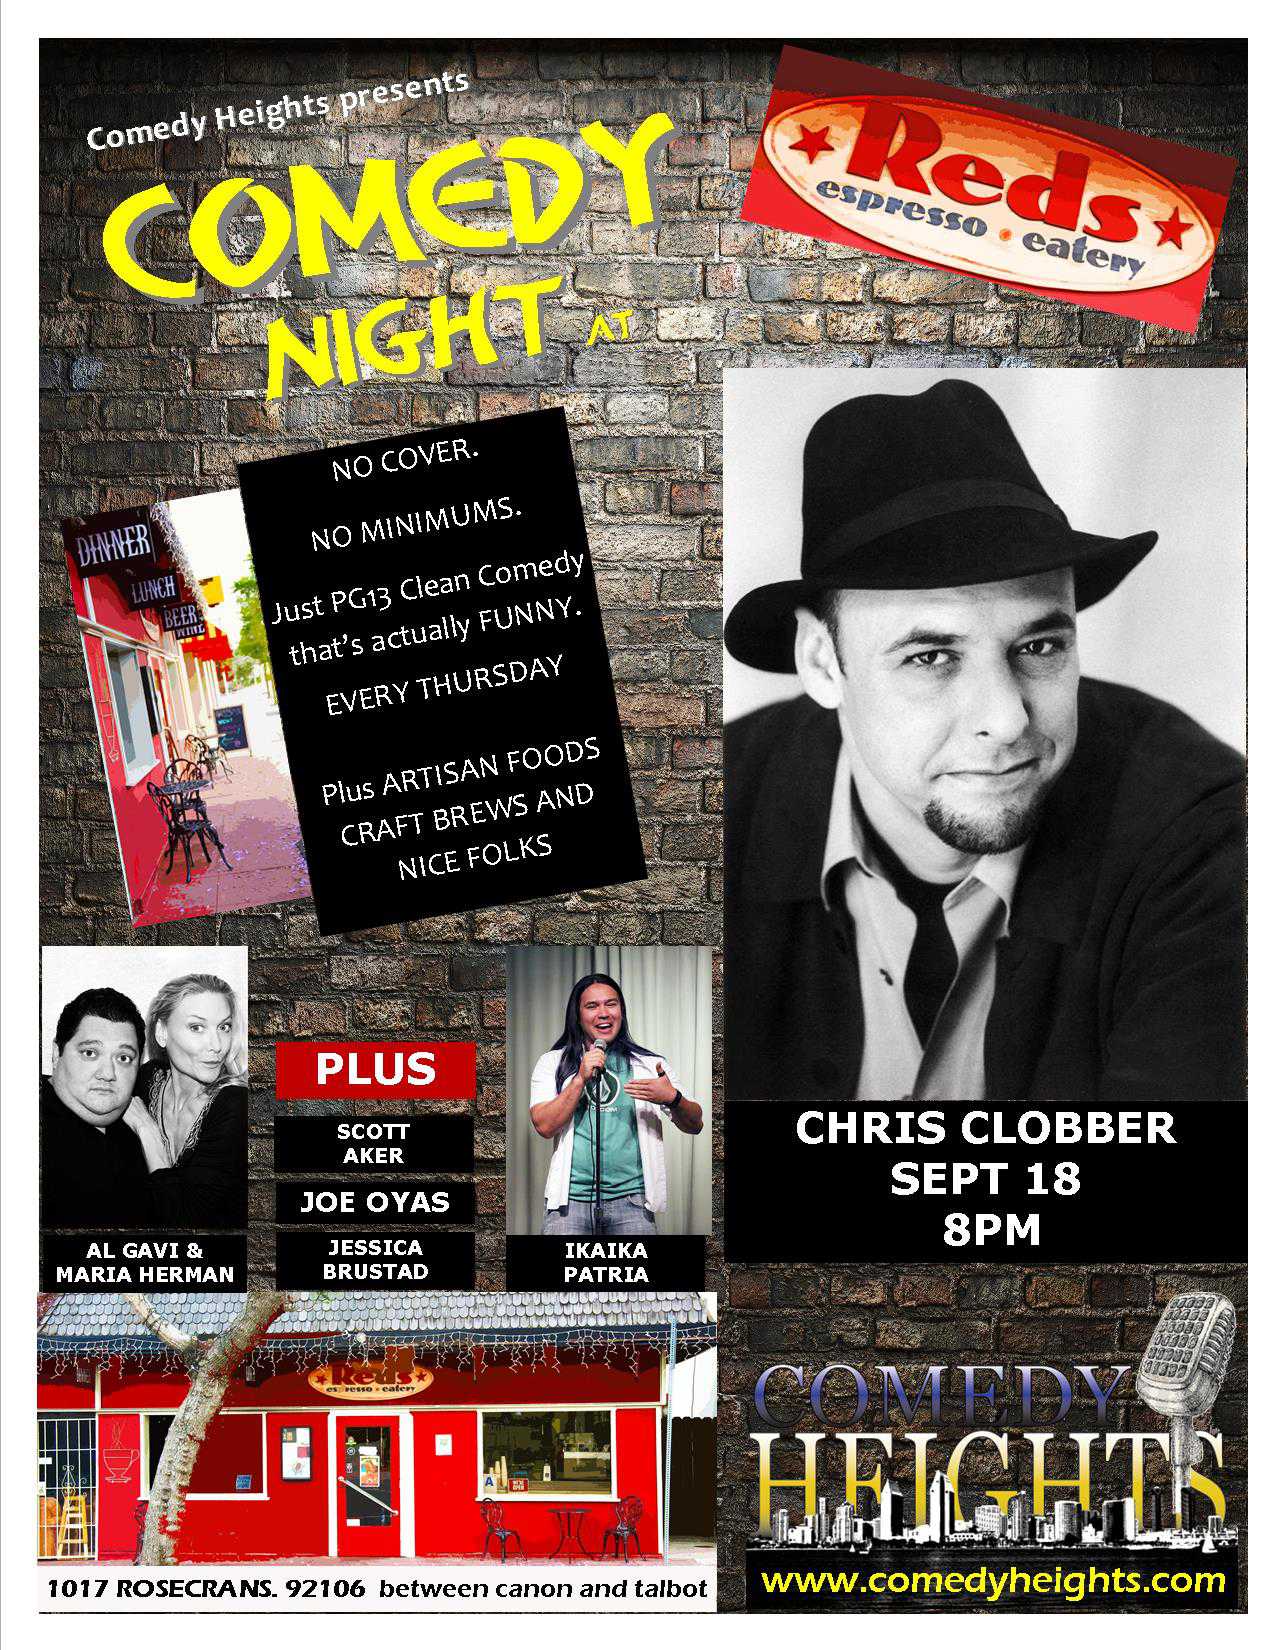 Chris Clobber Cometh TONIGHT at Reds! – Comedy Heights